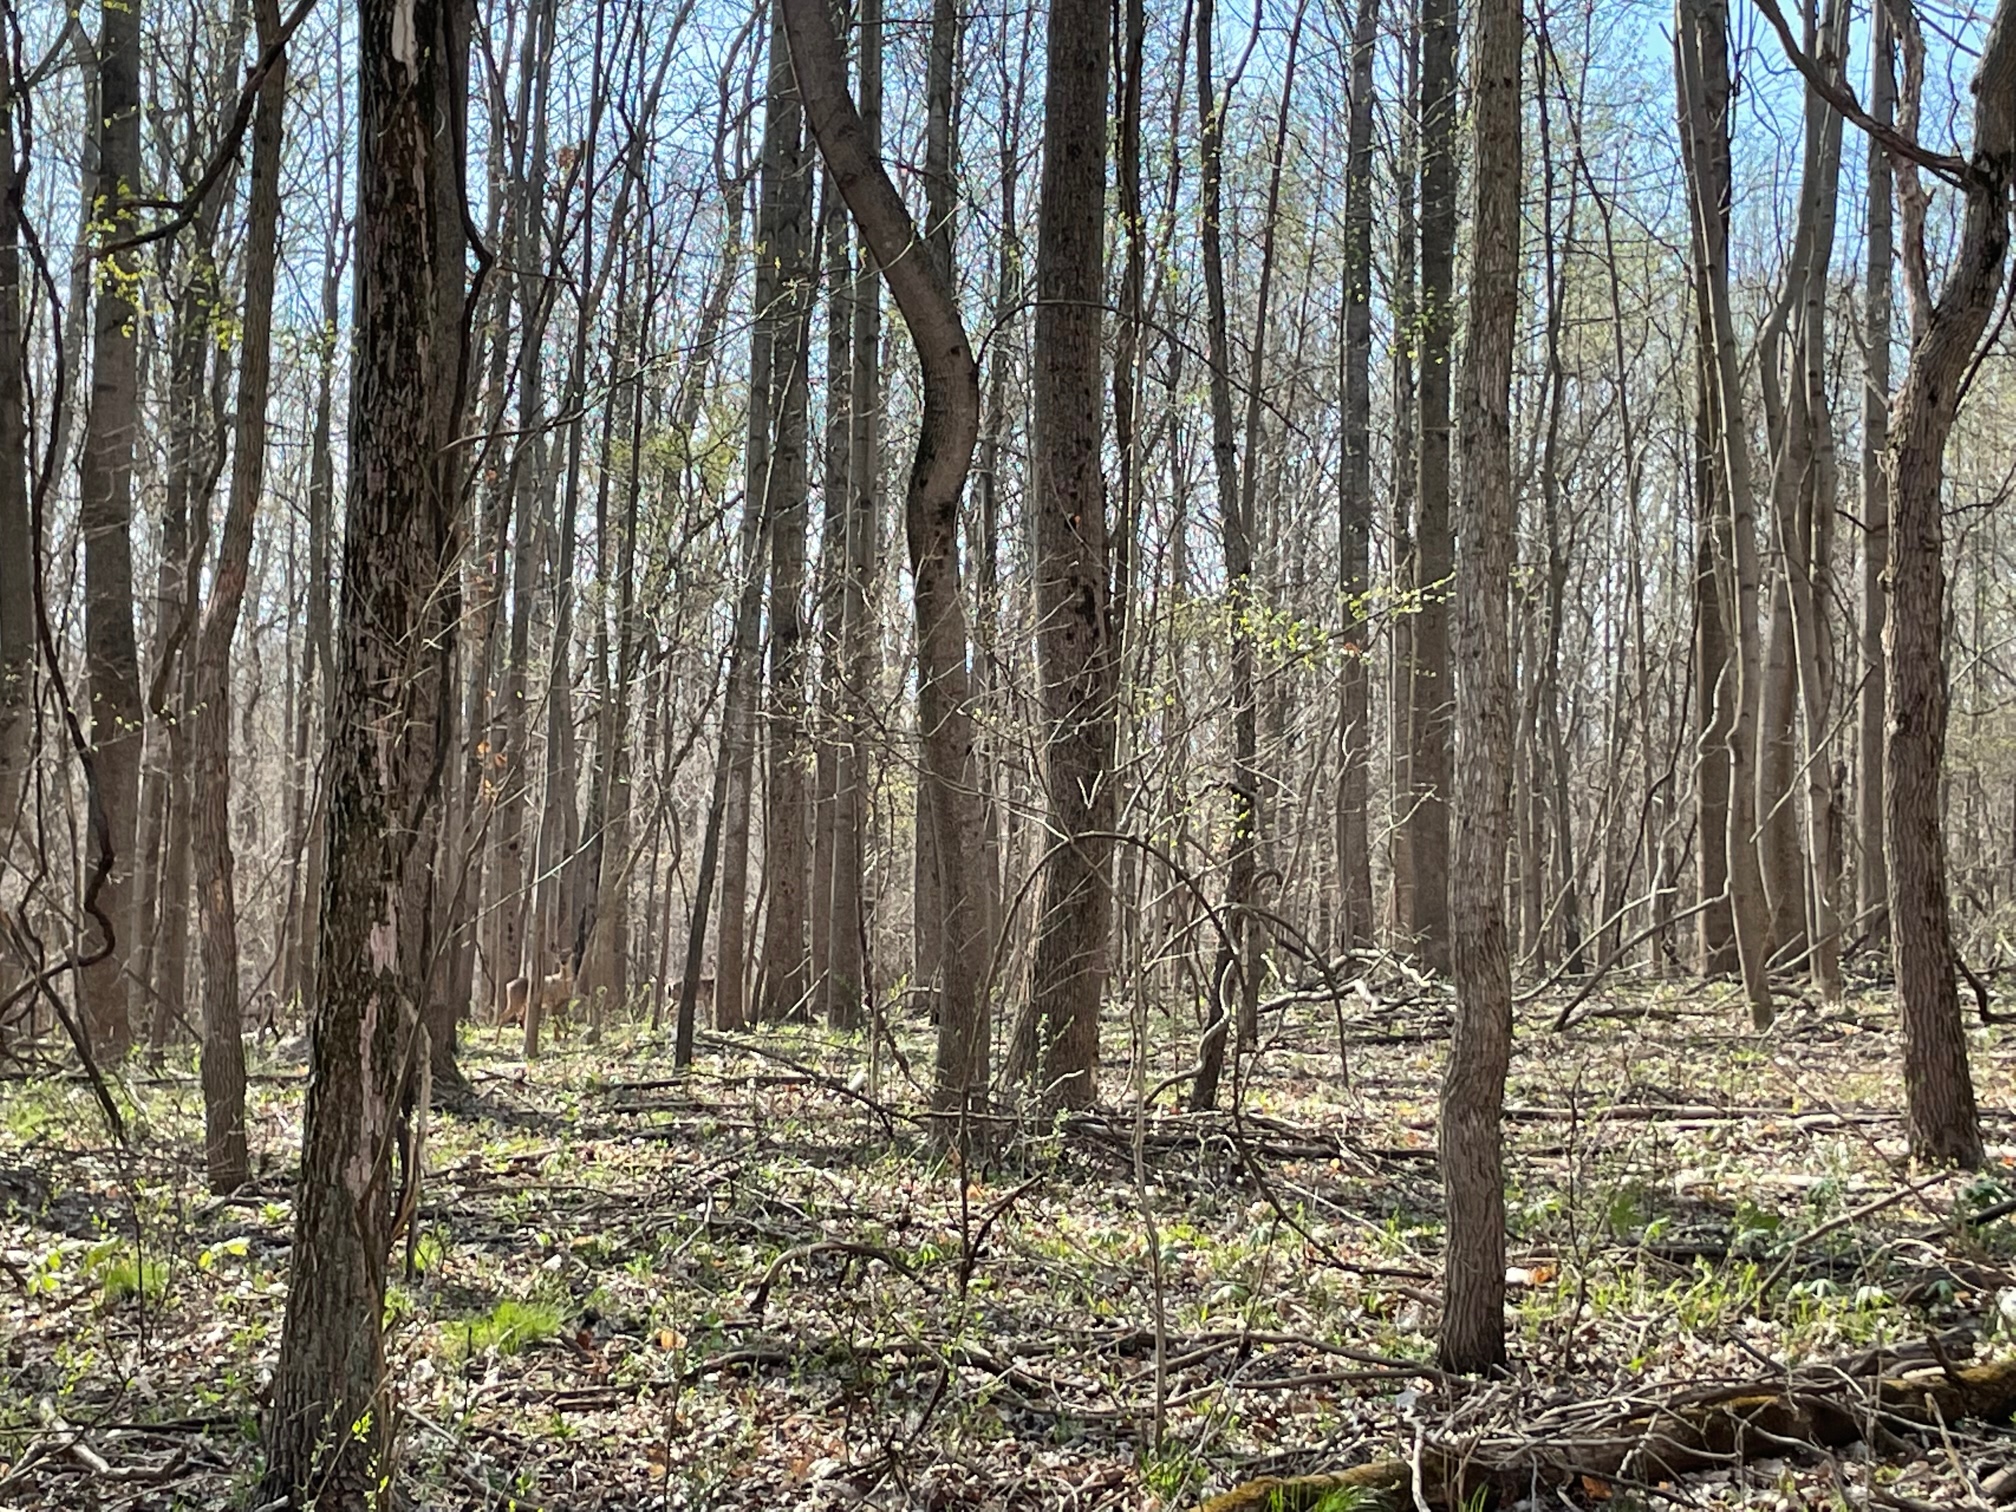 Photo of dense woods with two deer in the background partially obscured by trees. Main color in the photo is various shades of brown and some green budding leaves.